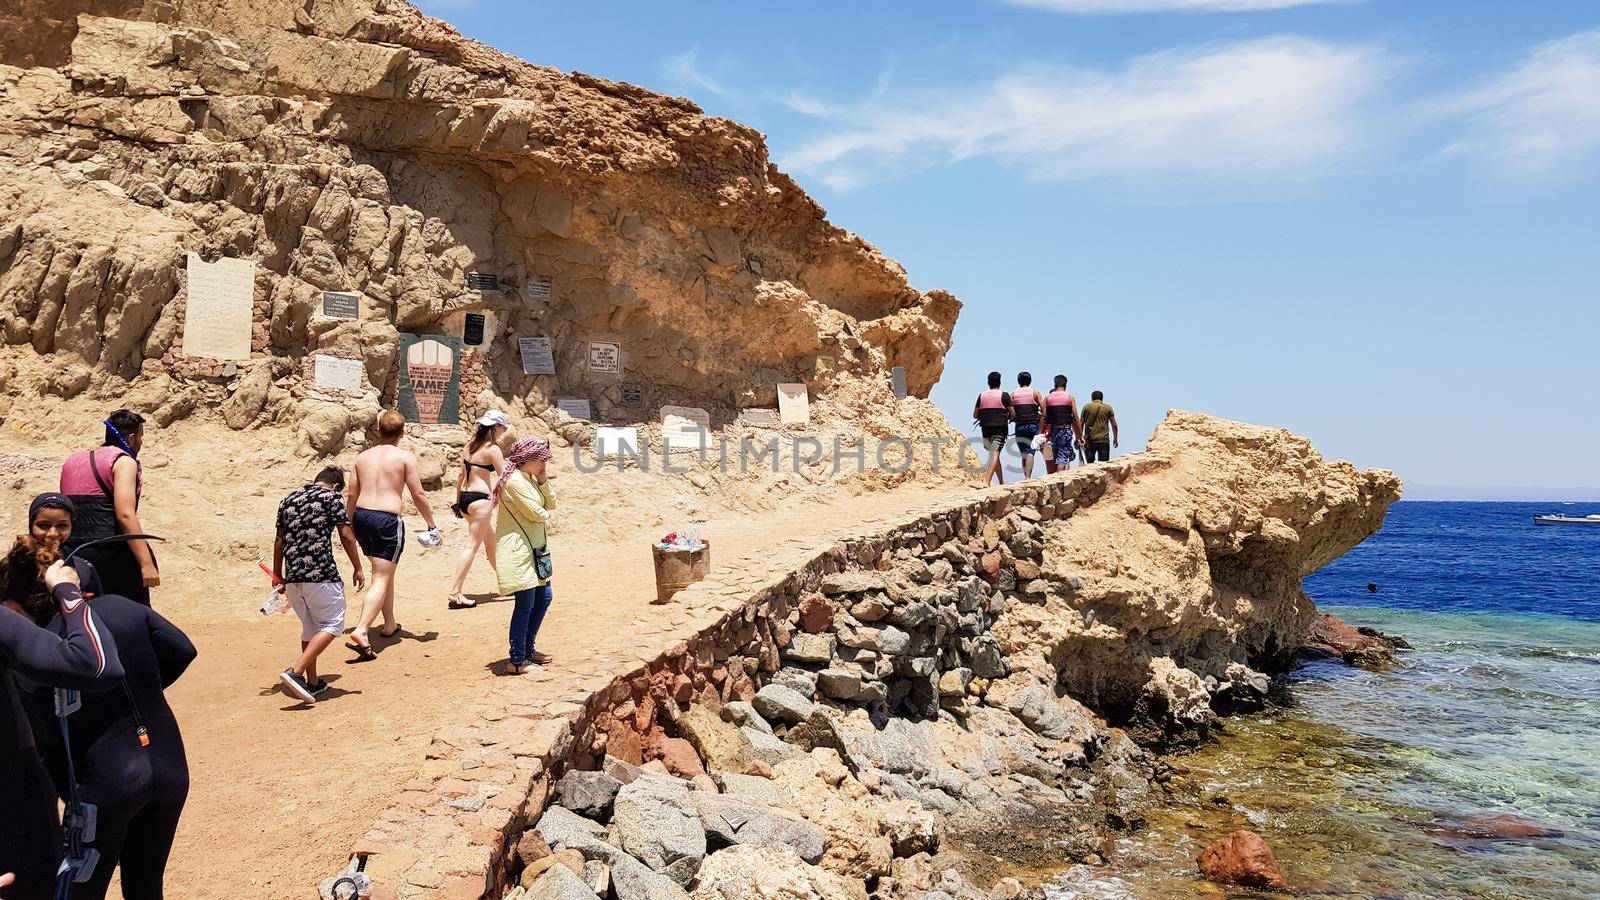 Egypt, Dahab - October 17, 2019: The Blue Hole is a popular diving spot in East Sinai. Sunny beach resort on the Red Sea in Dahab. A famous tourist destination near Sharm el Sheikh. Bright sunshine by Roshchyn